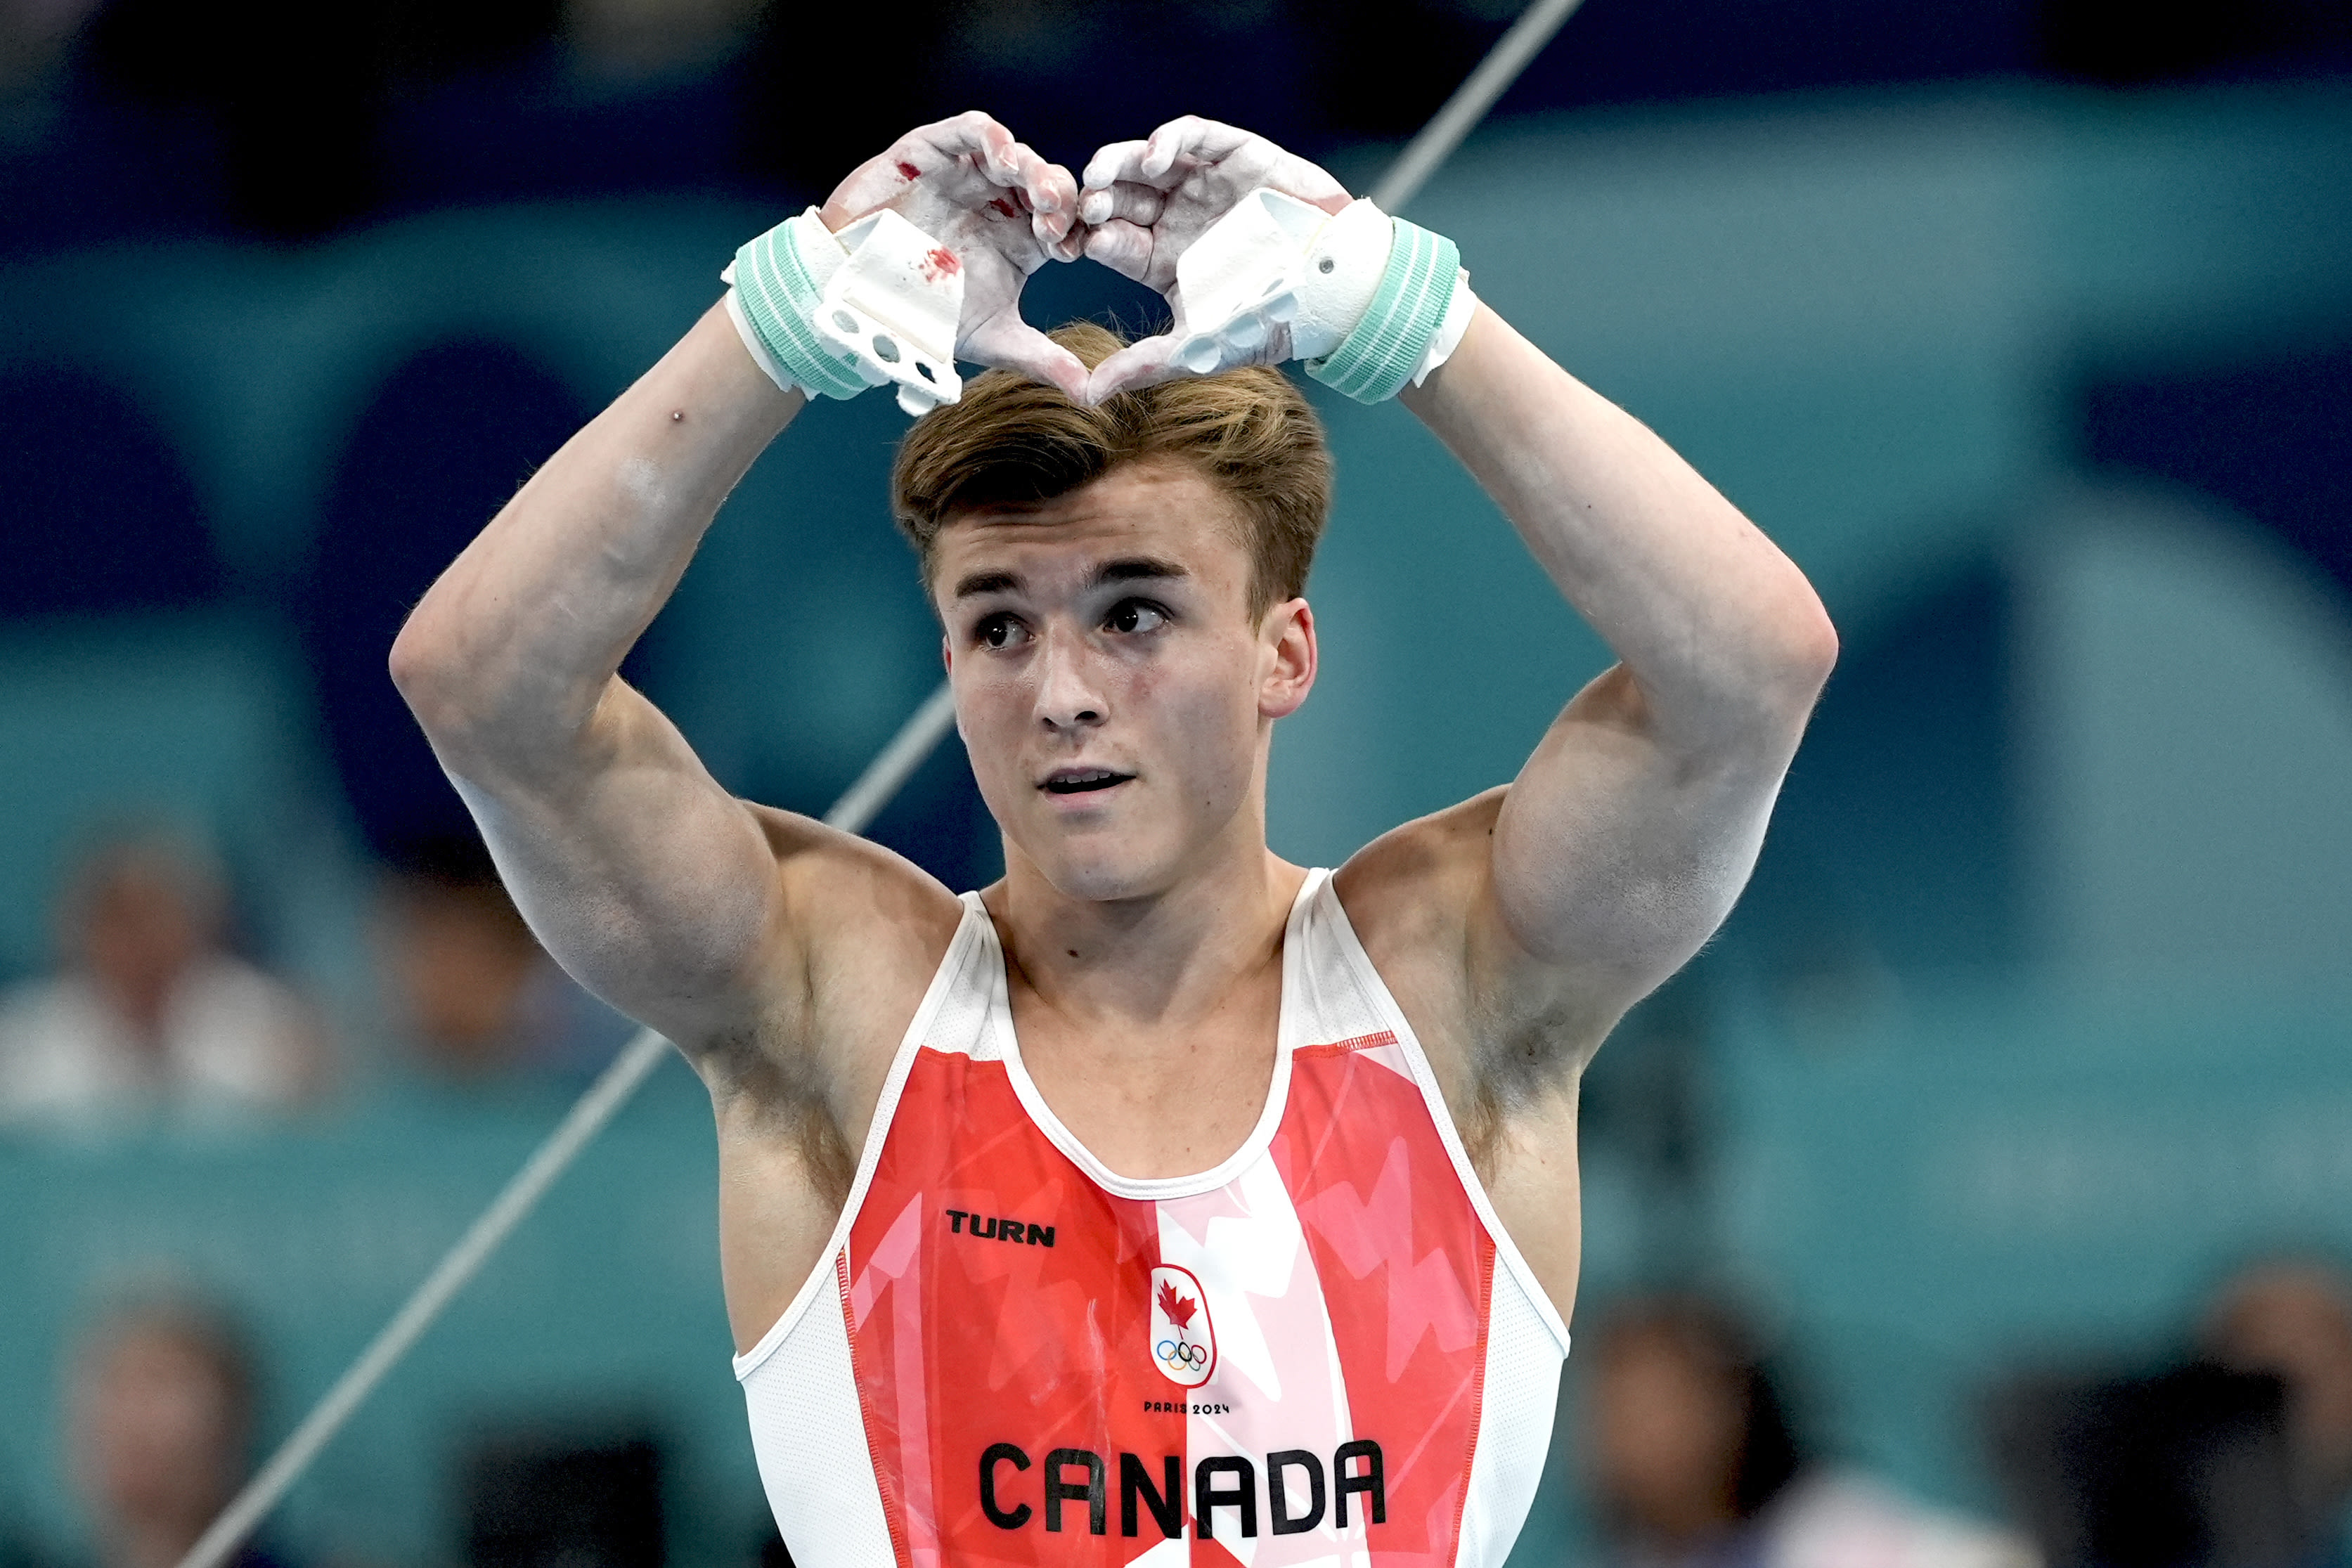 Canadian gymnast Felix Dolci suffers freak accident on high bar — draws roaring ovation for finishing Olympic routine: 'I've never seen this happen before'